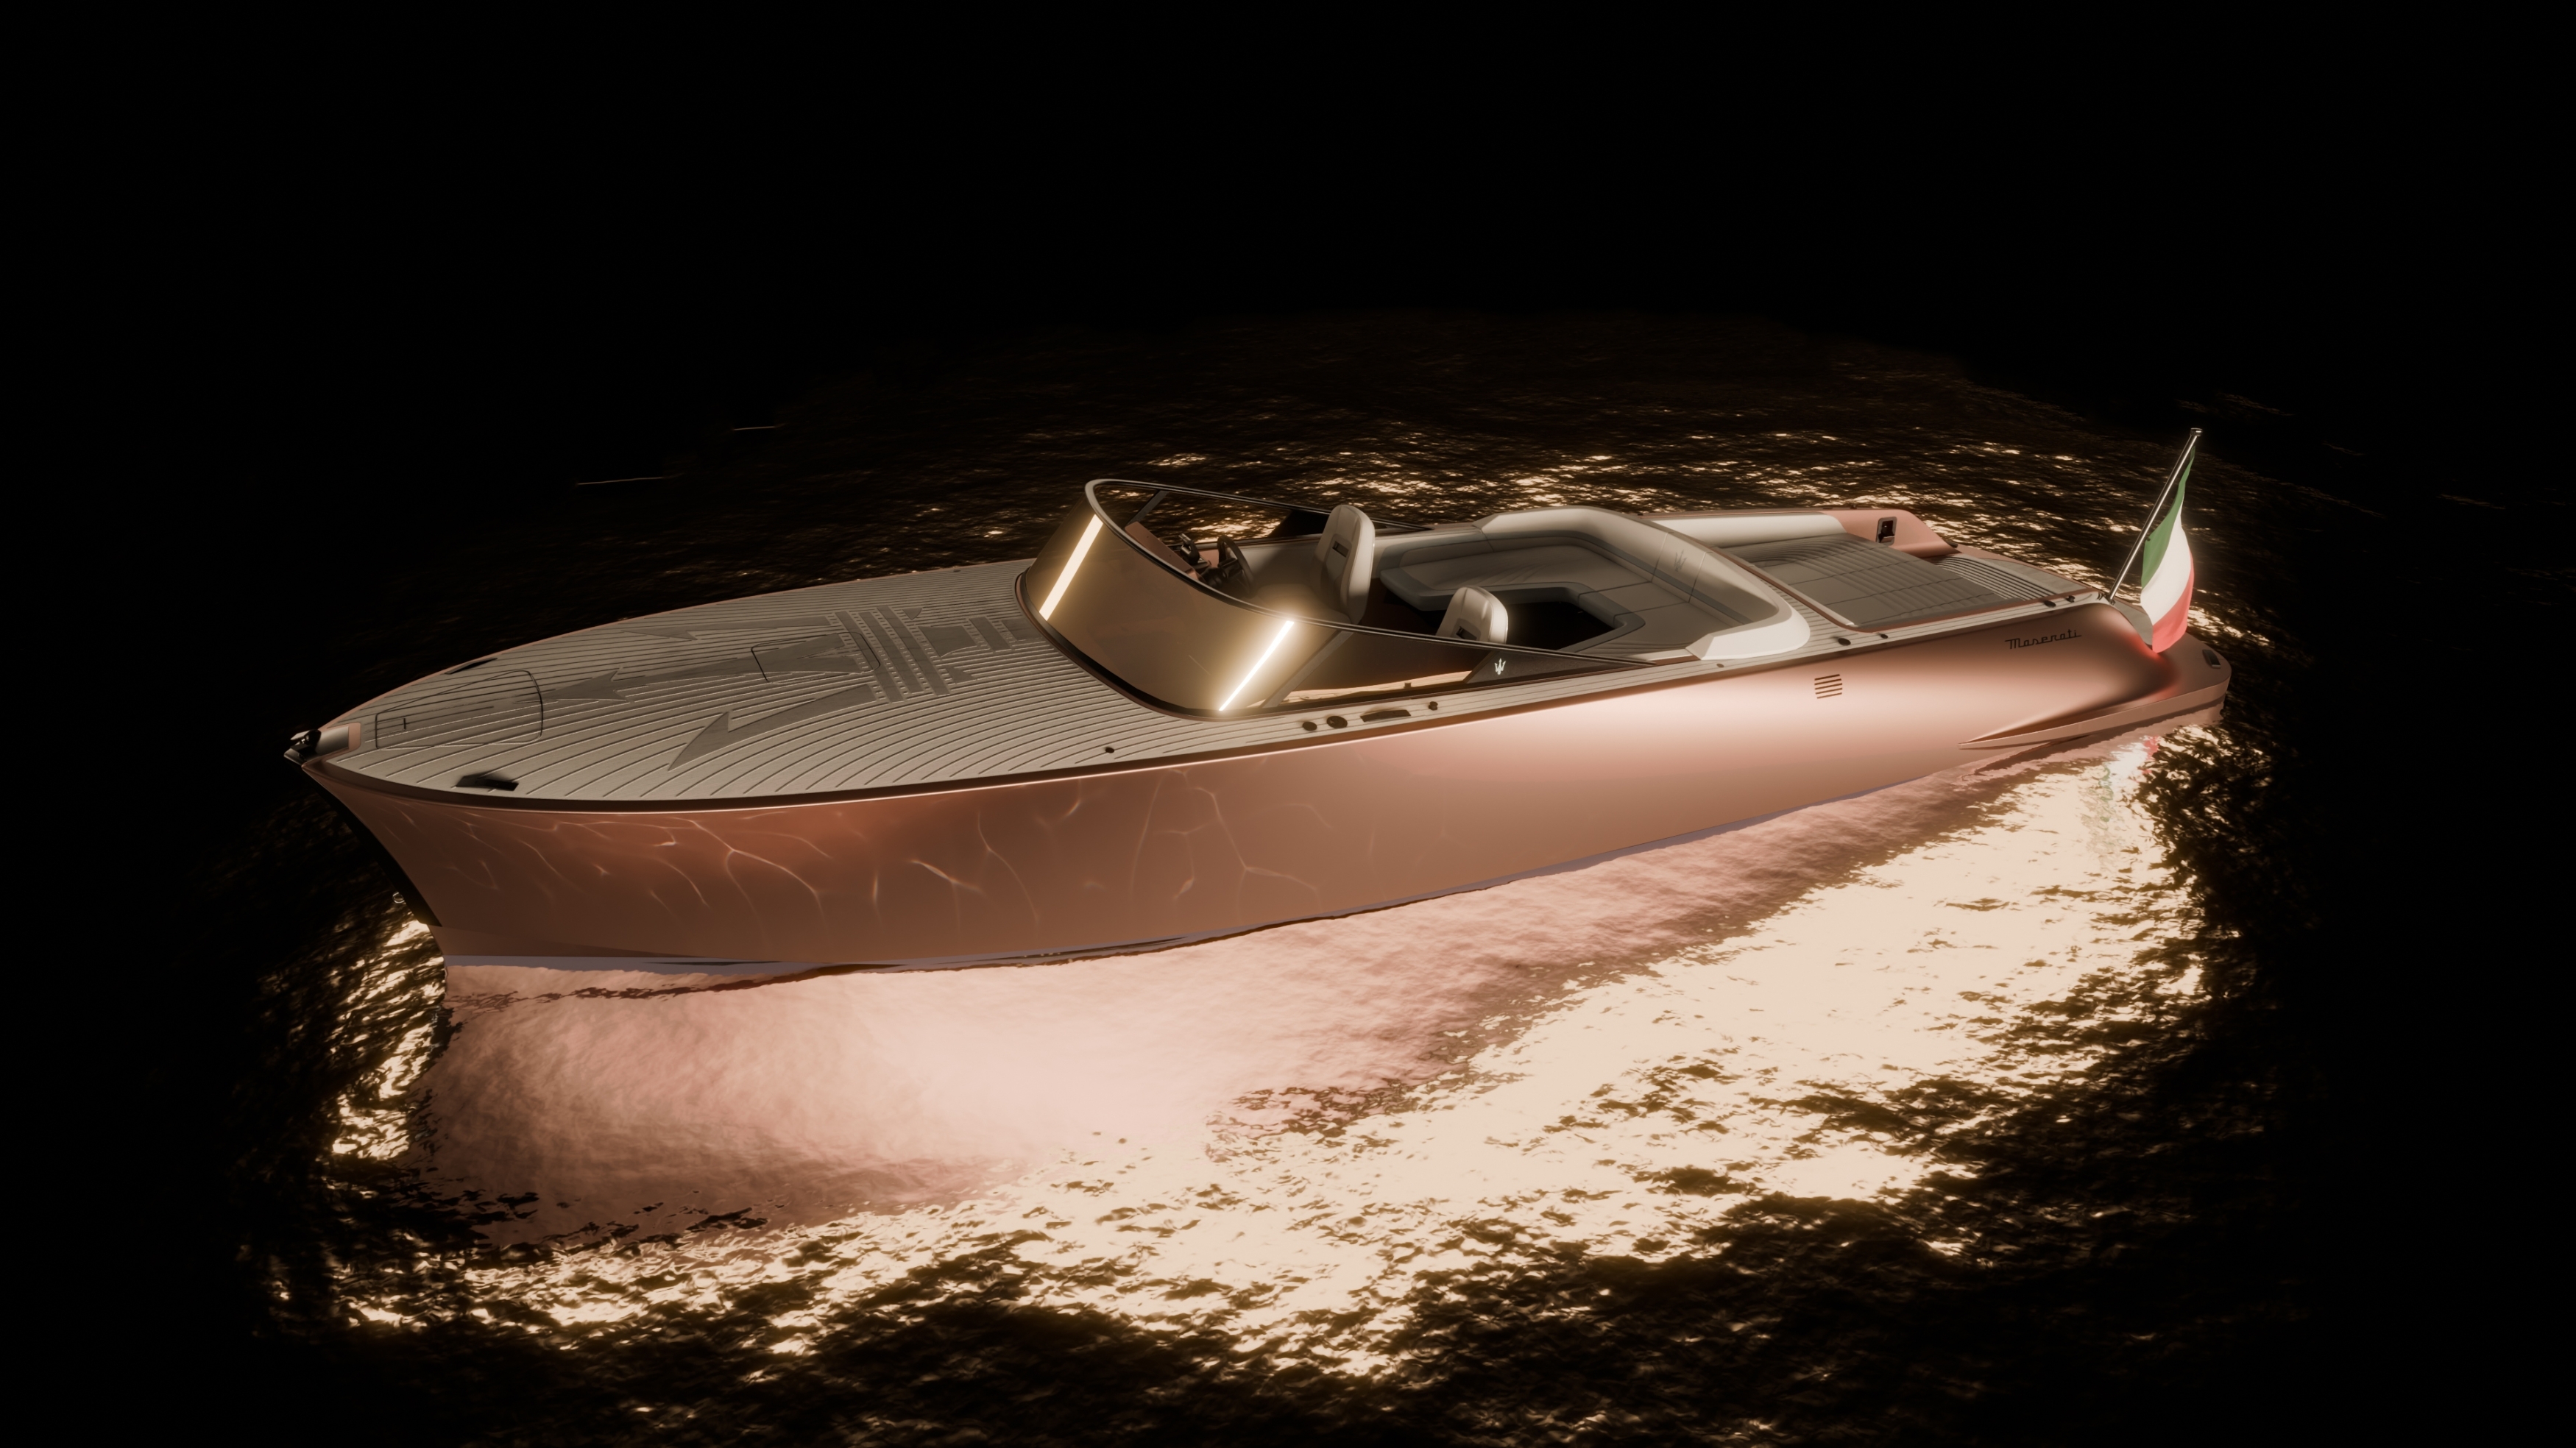 Maserati’s new all-electric boat is capable of 600 horsepower